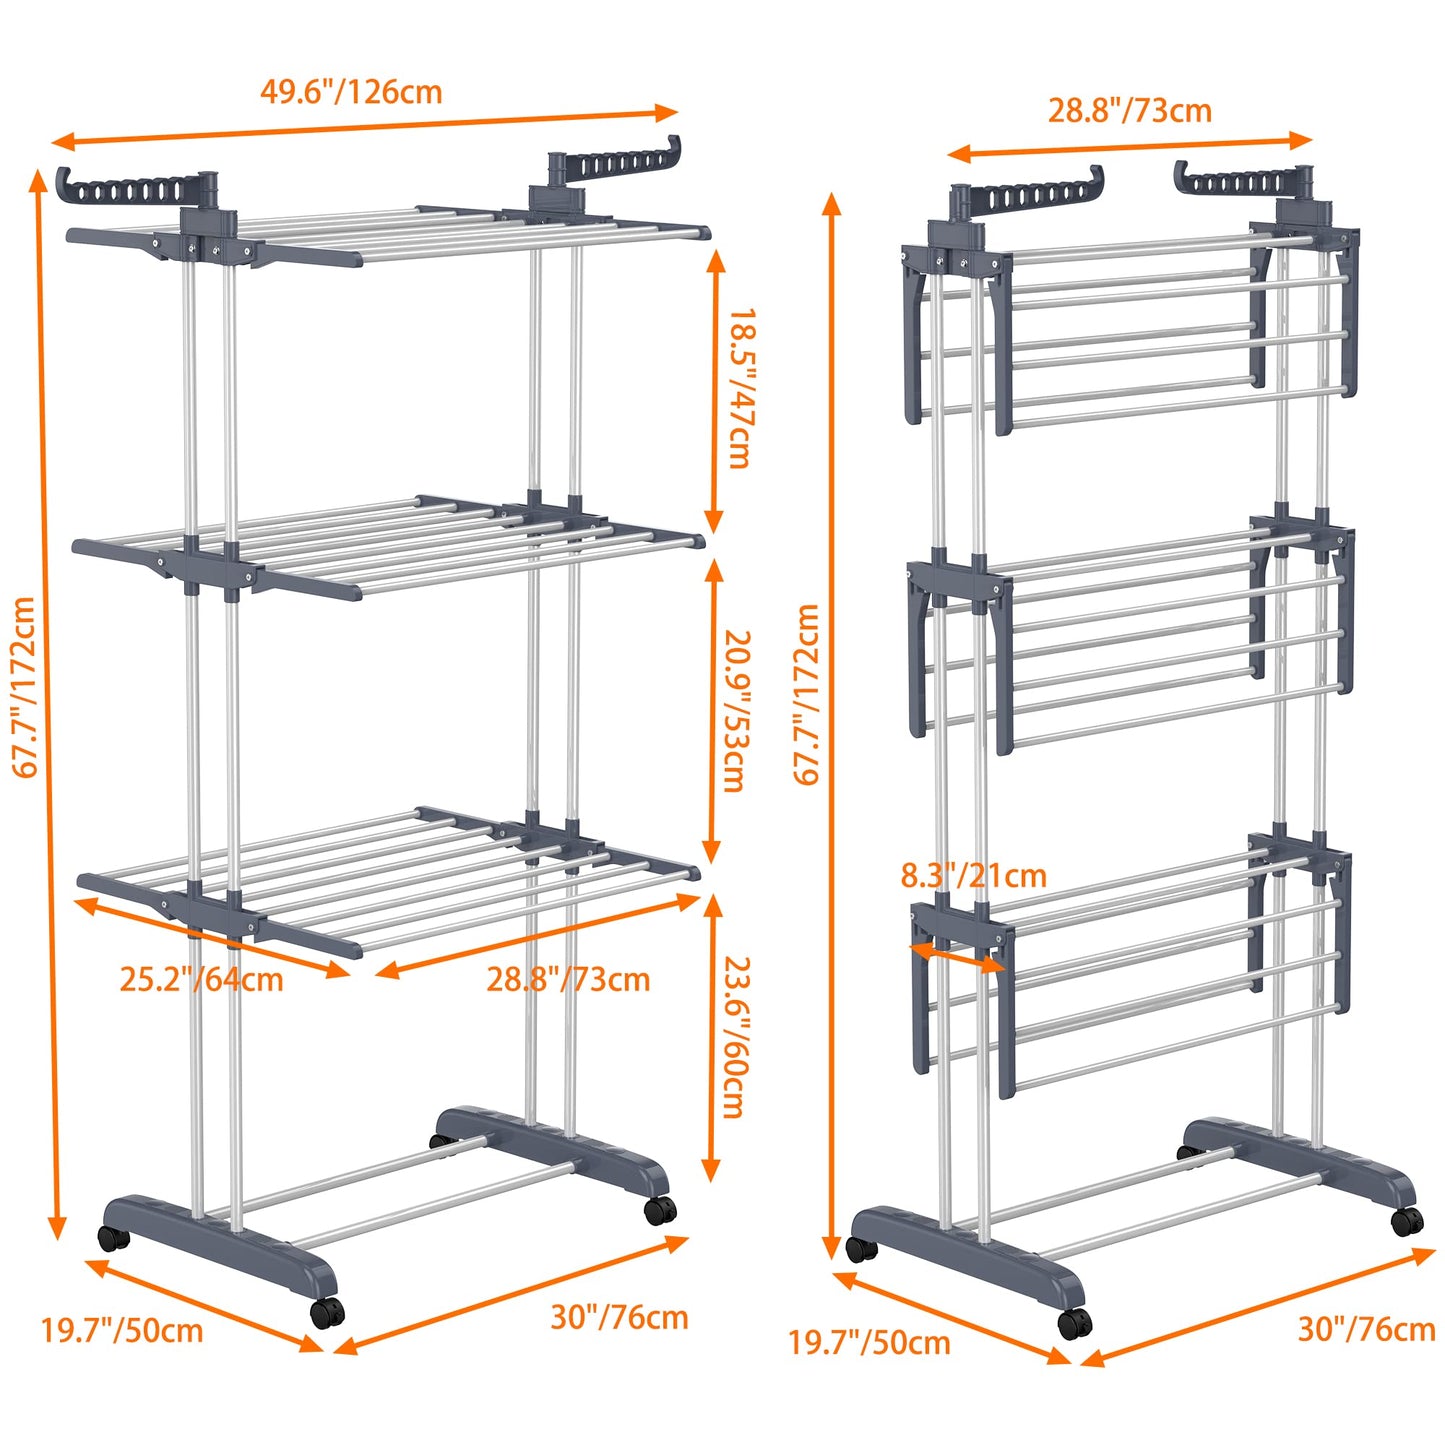 HOMIDEC Airer Clothes Drying Rack,4-Tier Foldable Clothes Hanger Adjustable Large Stainless Steel Garment Laundry Racks for Indoor Outdoor